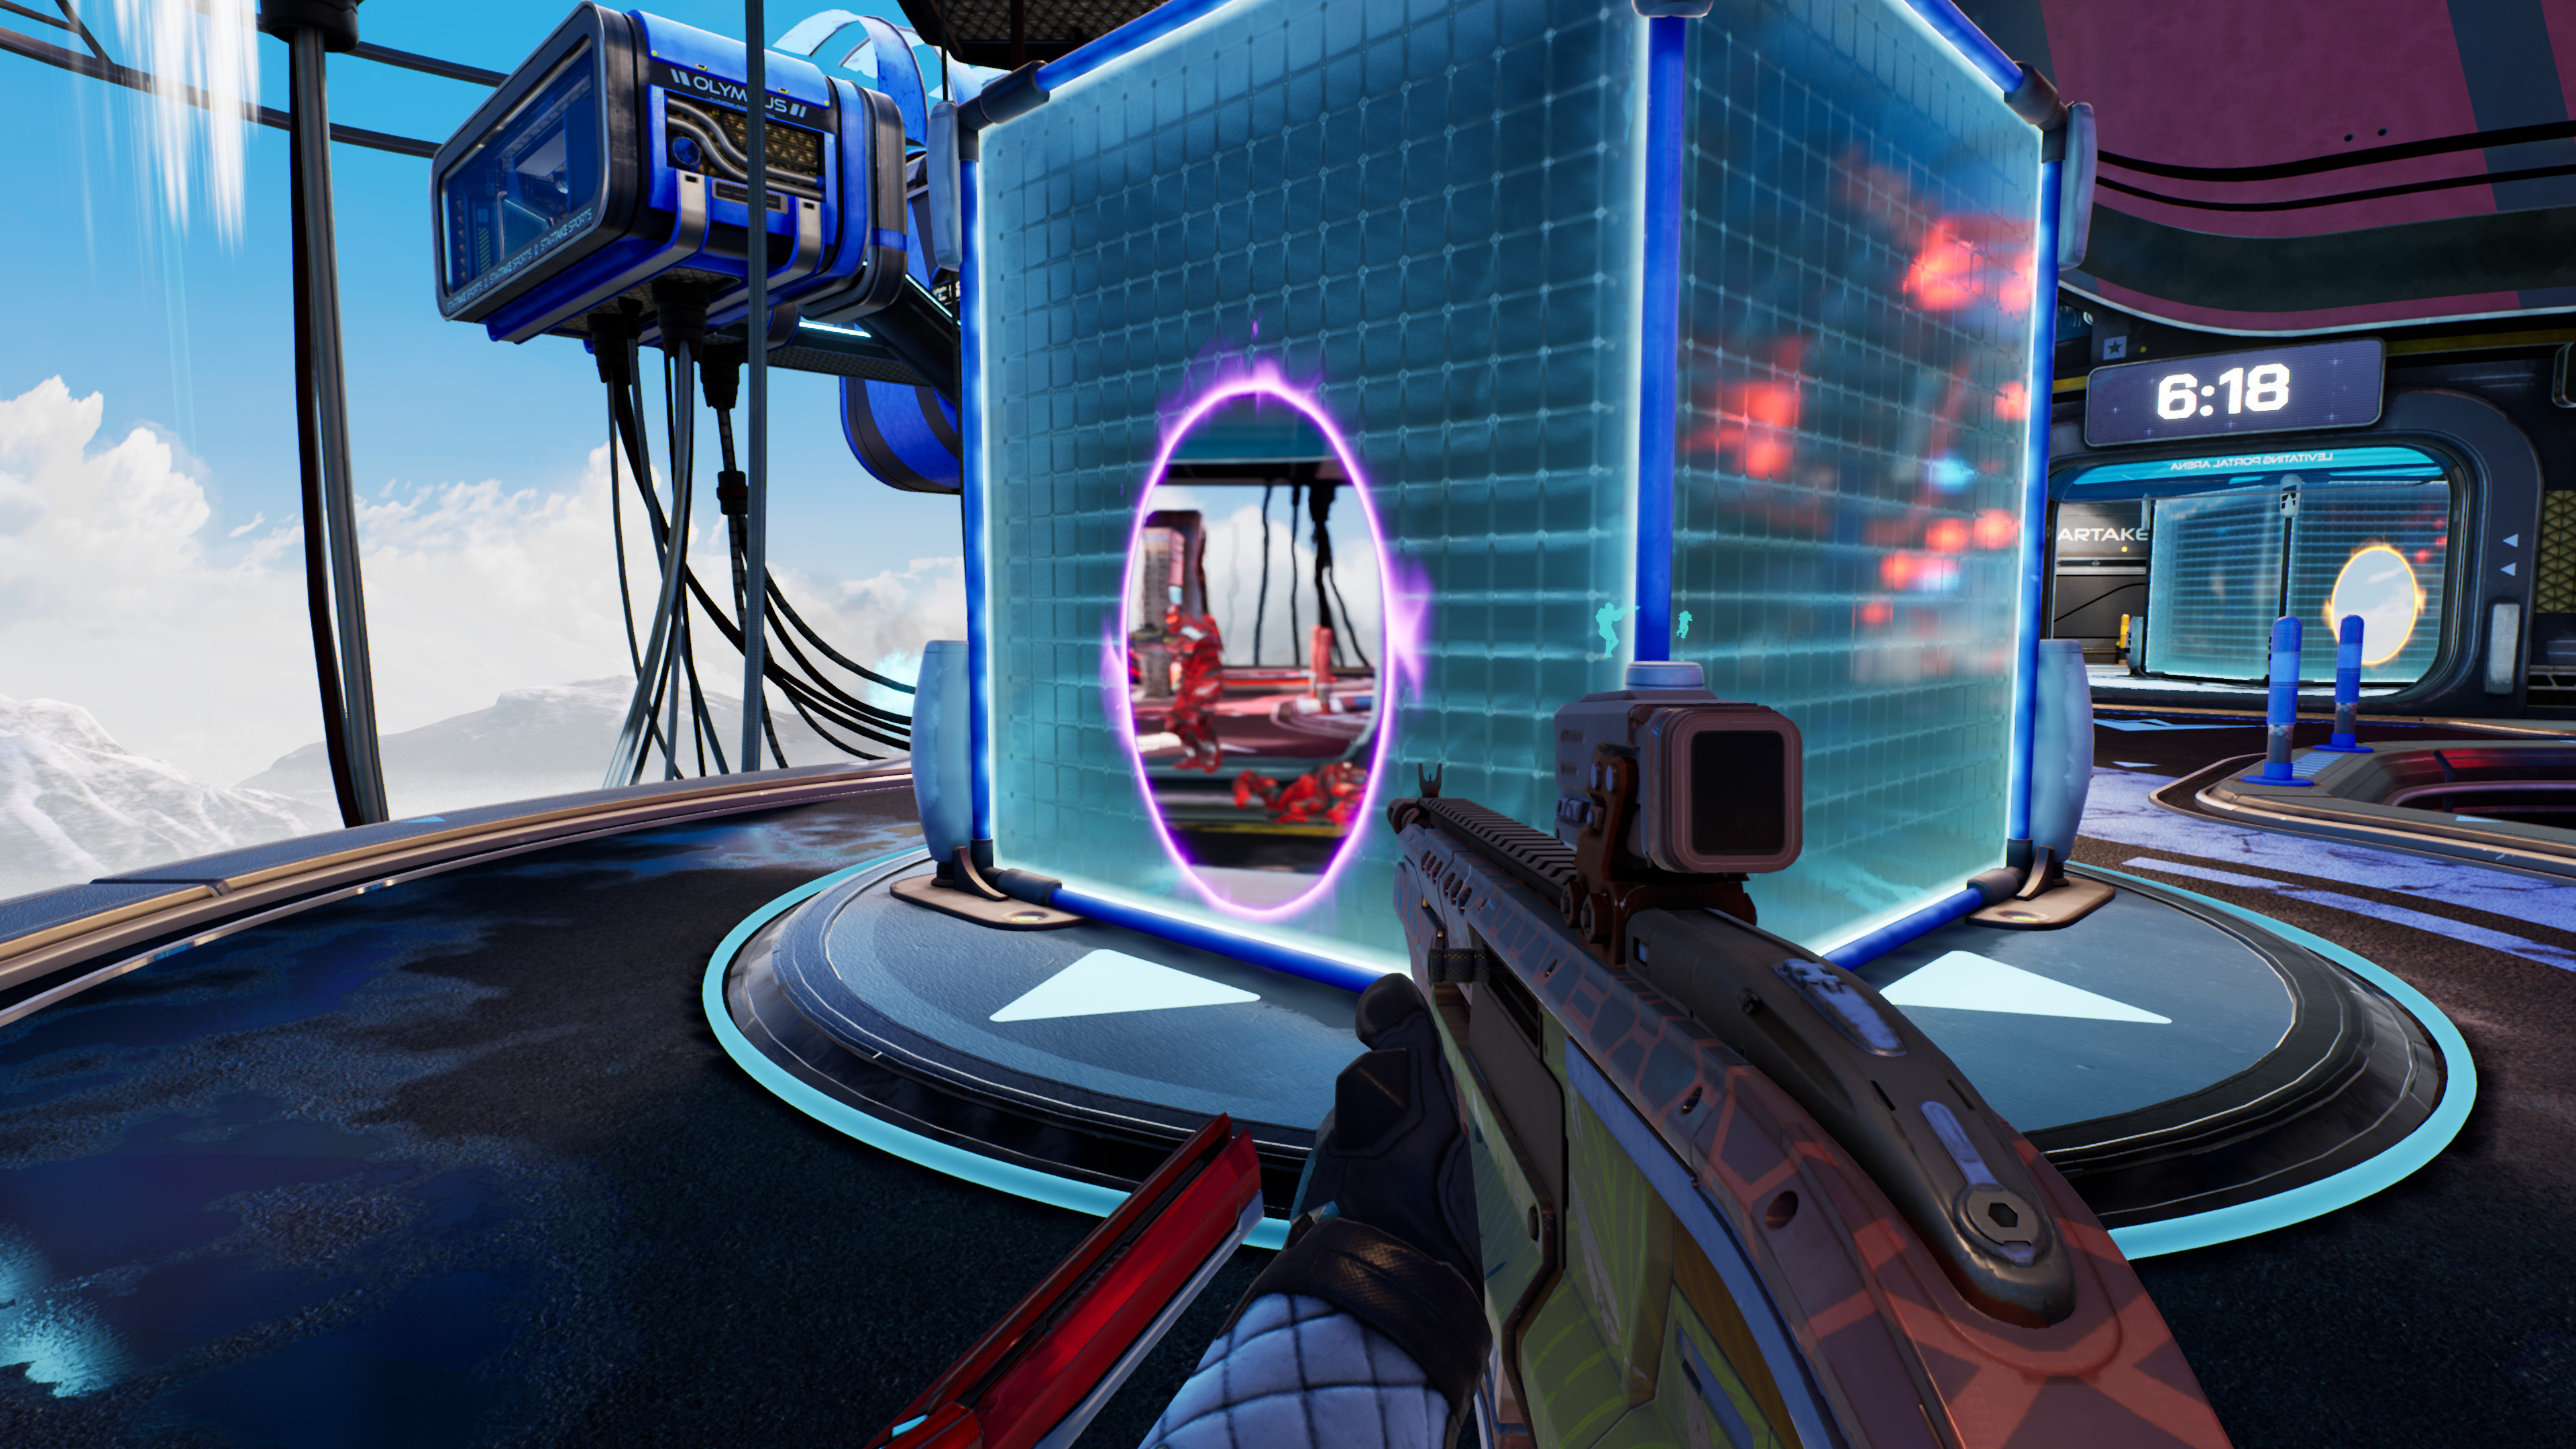 Splitgate - a player looks down the barrel of their rifle at a nearby futuristic balcony. A central structure in the room has a portal opened up on it. Further down the hallway, the other end of the portal is visible, creating a hole in reality that connects at either end.